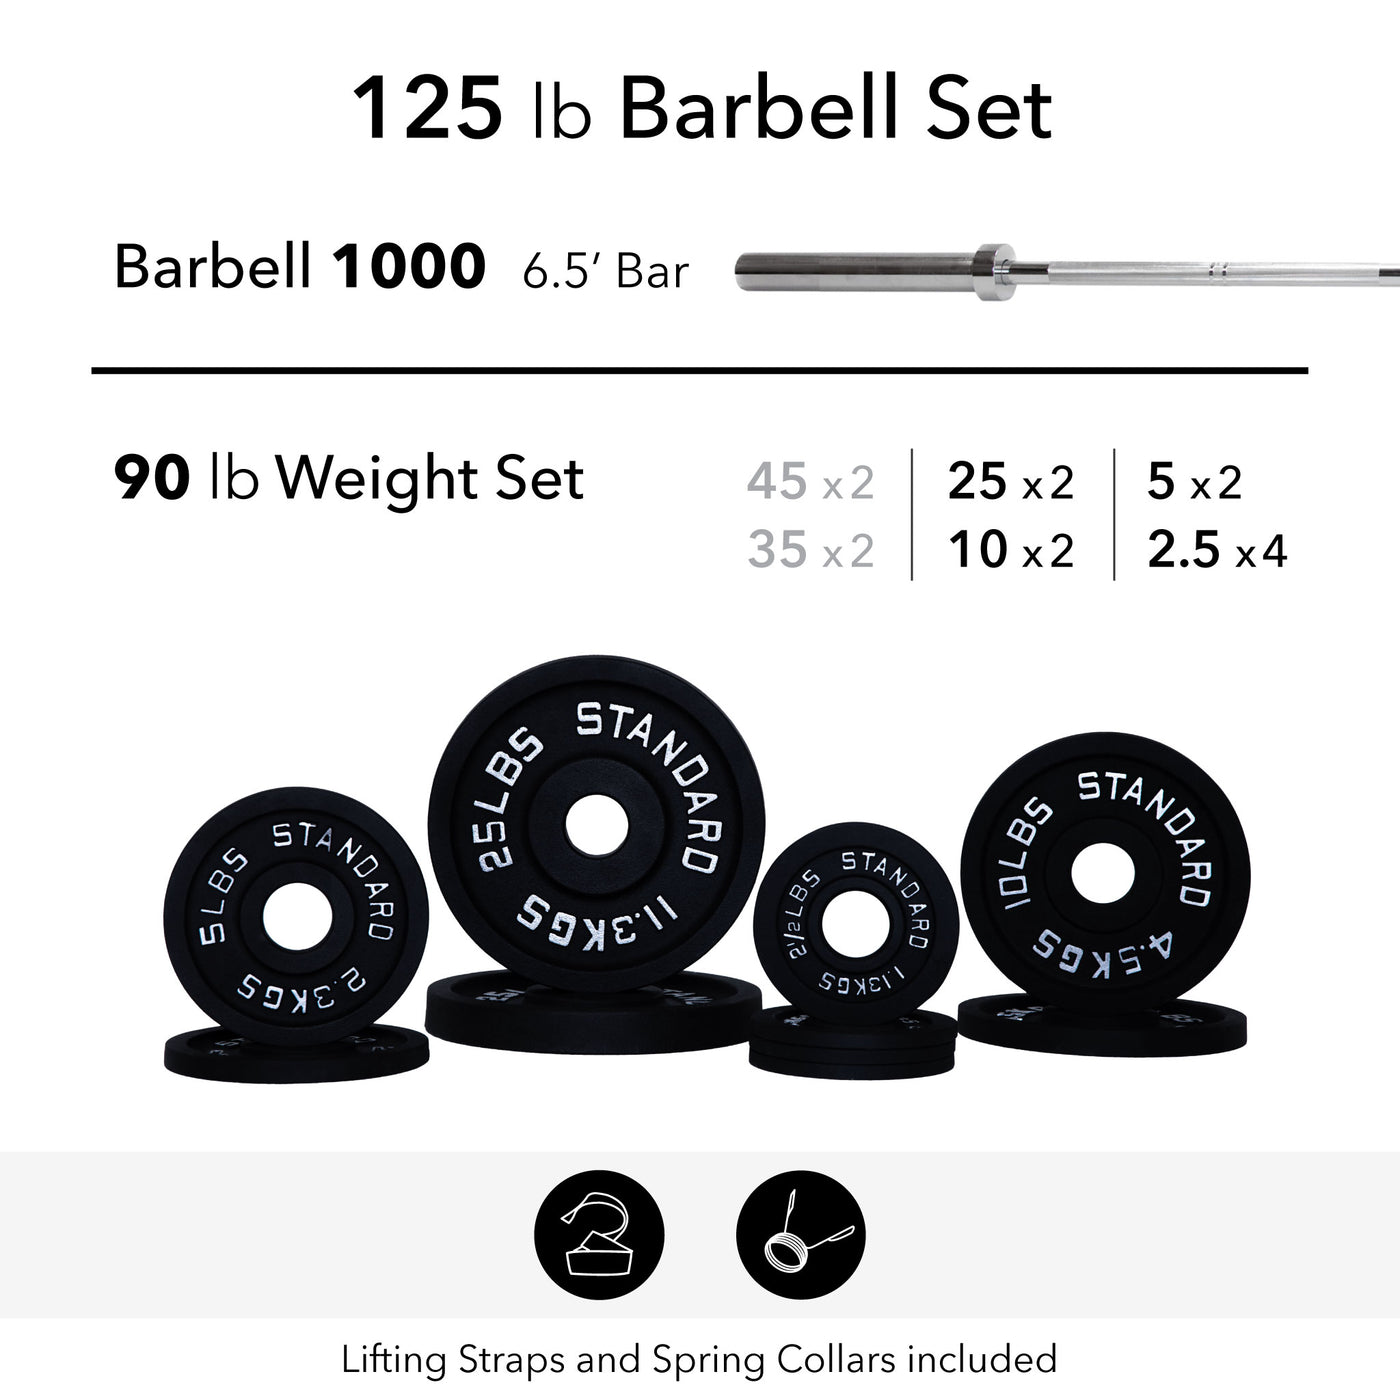 Barbell 1000 Sets